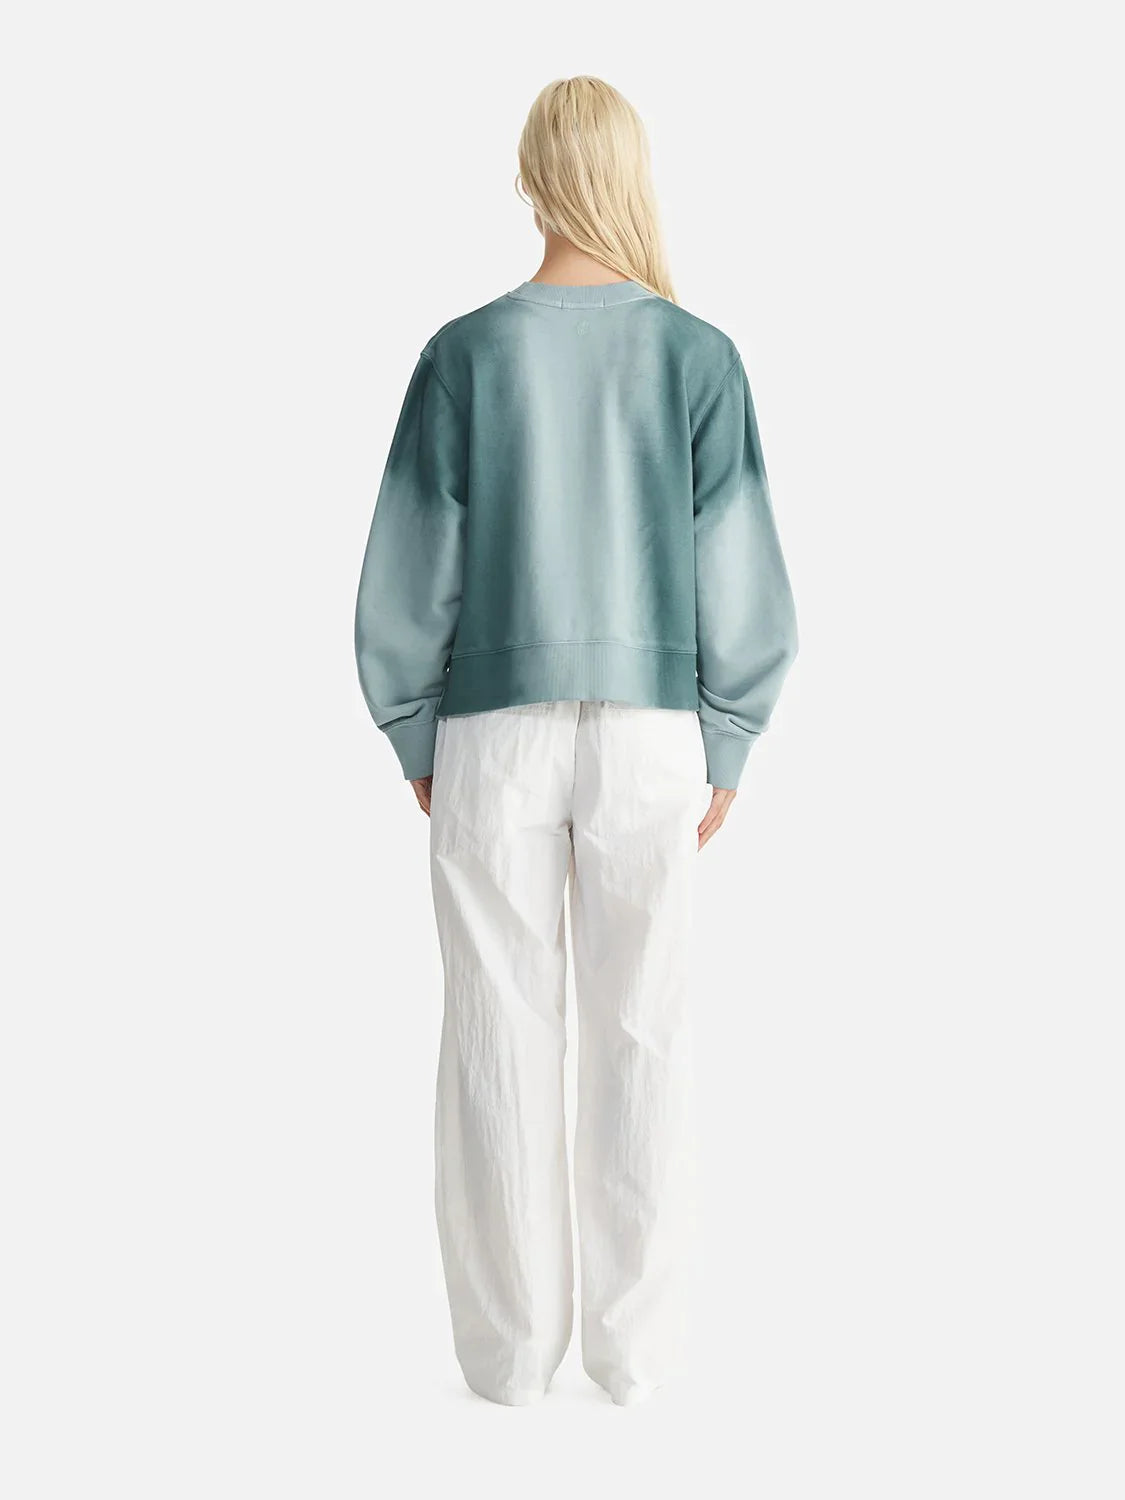 Ena Pelly - Remi Relaxed Sweater